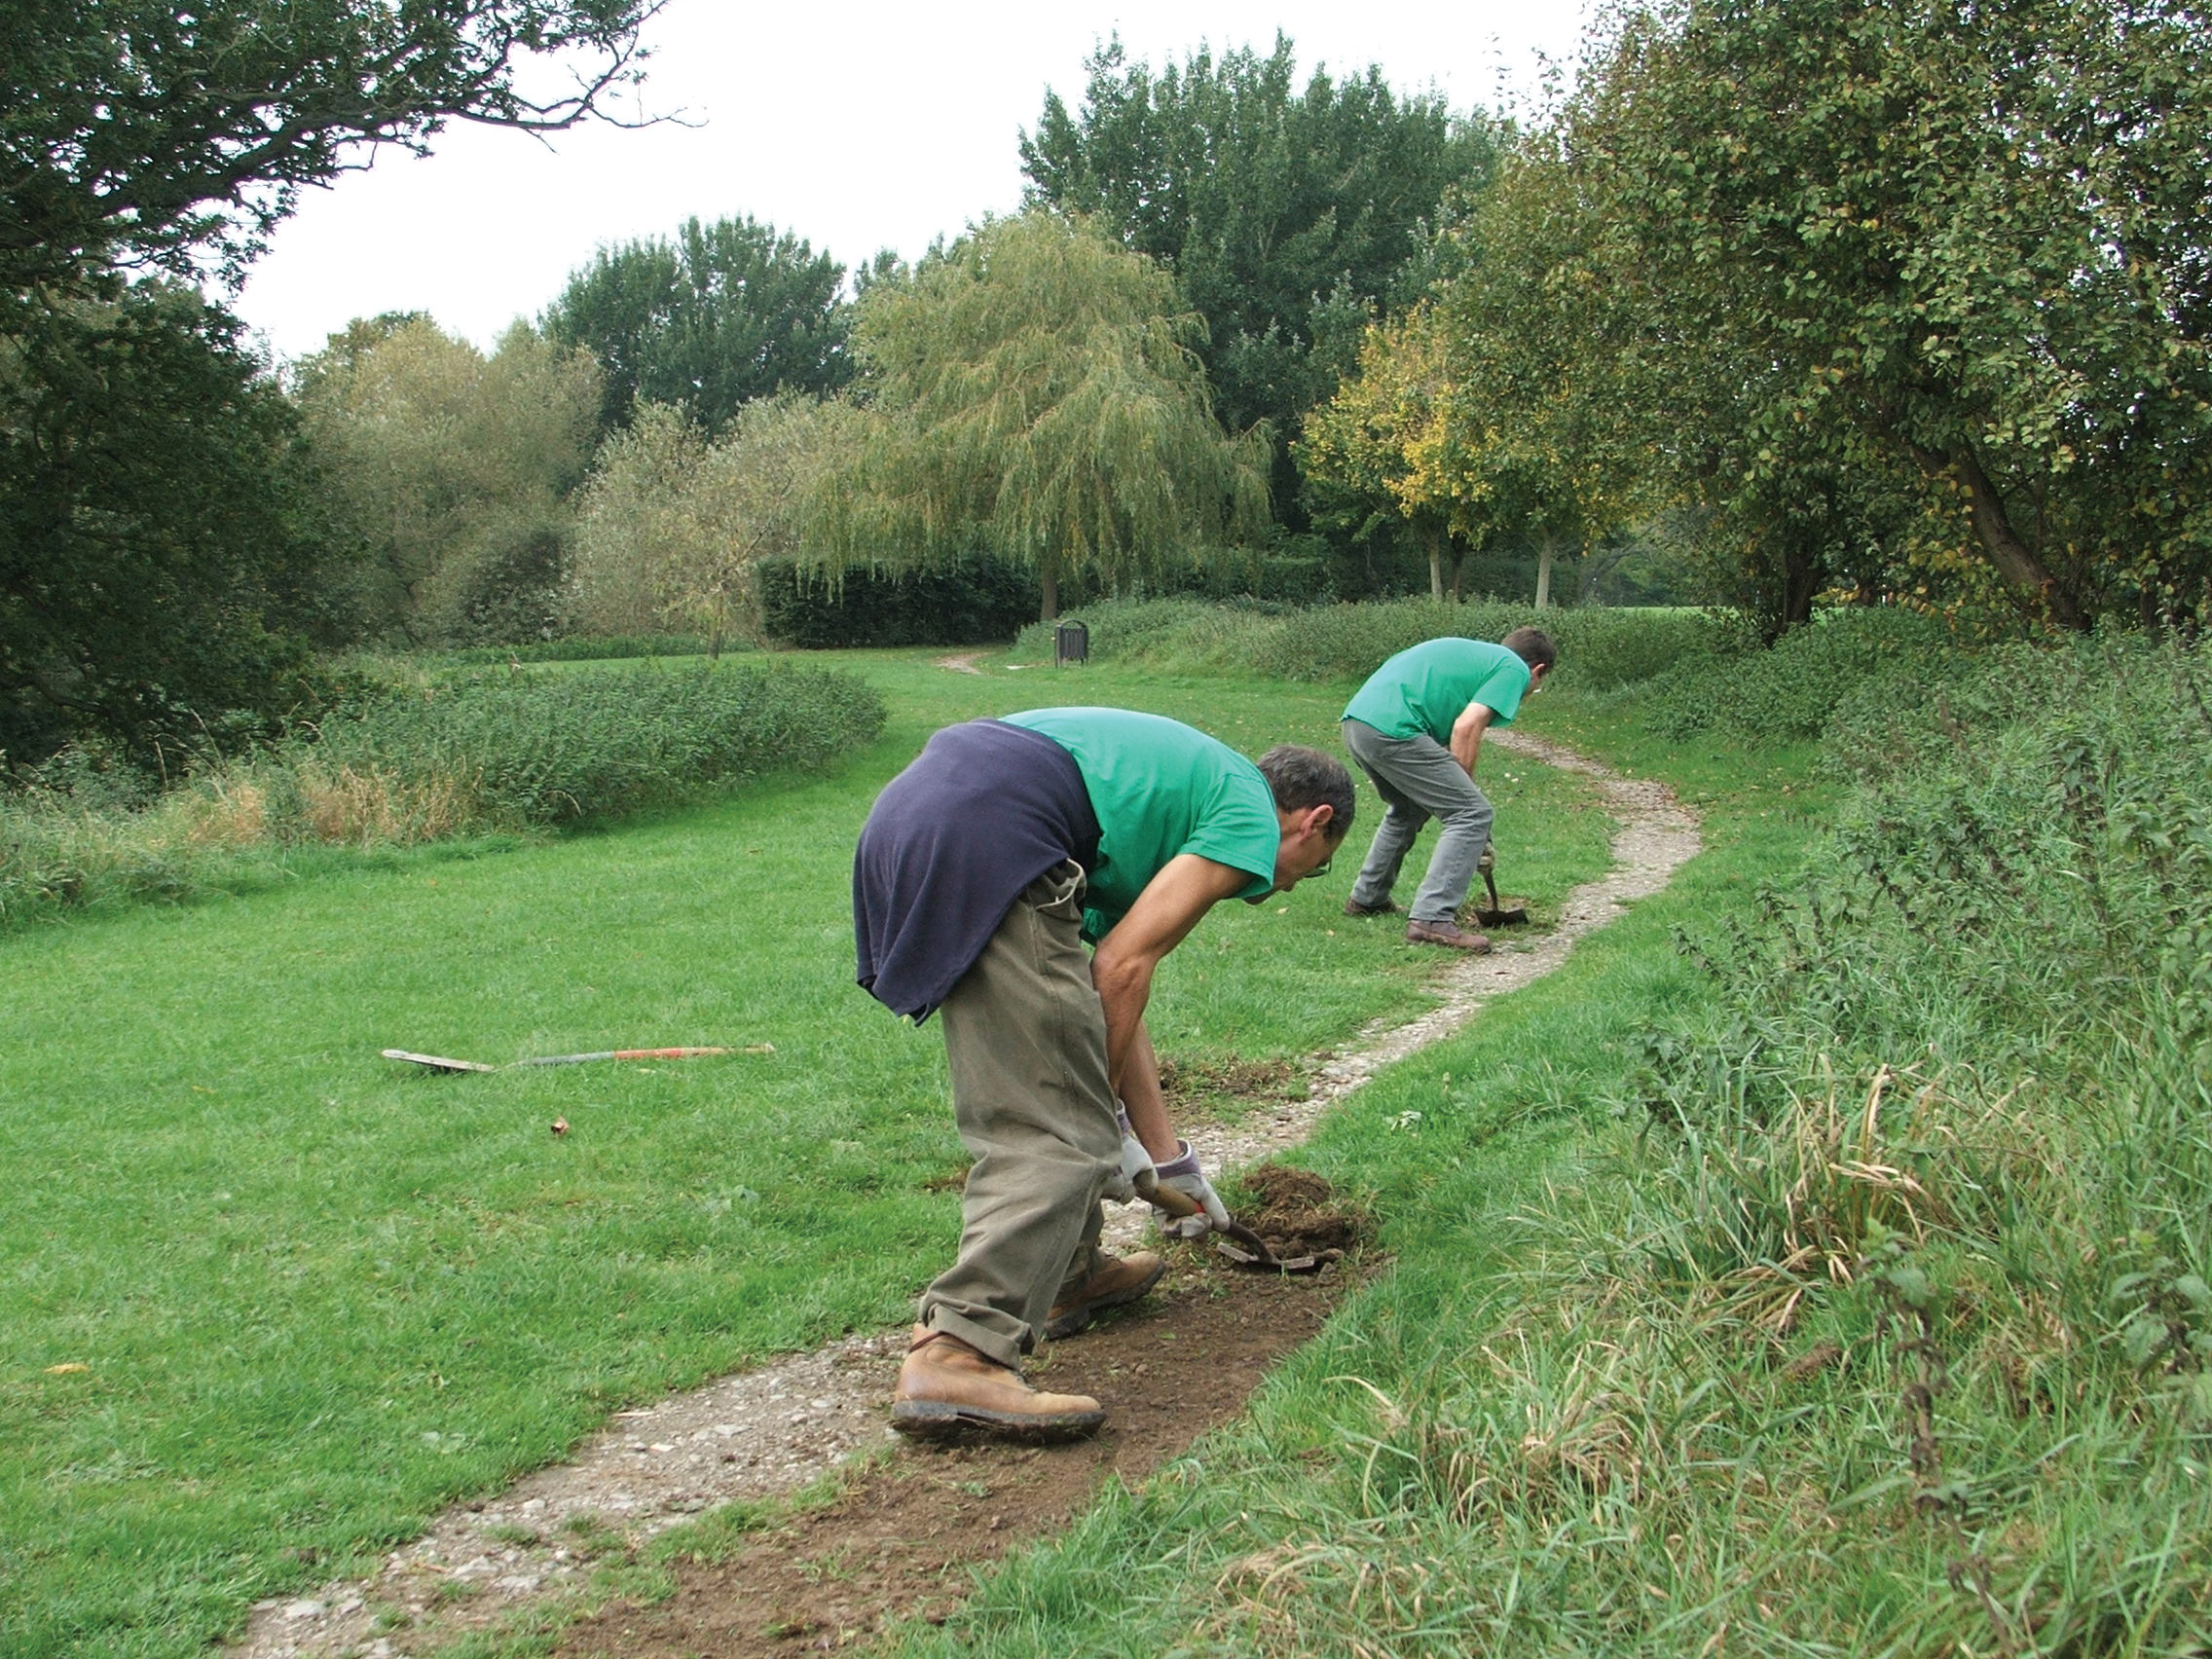 men working on creating a footpath